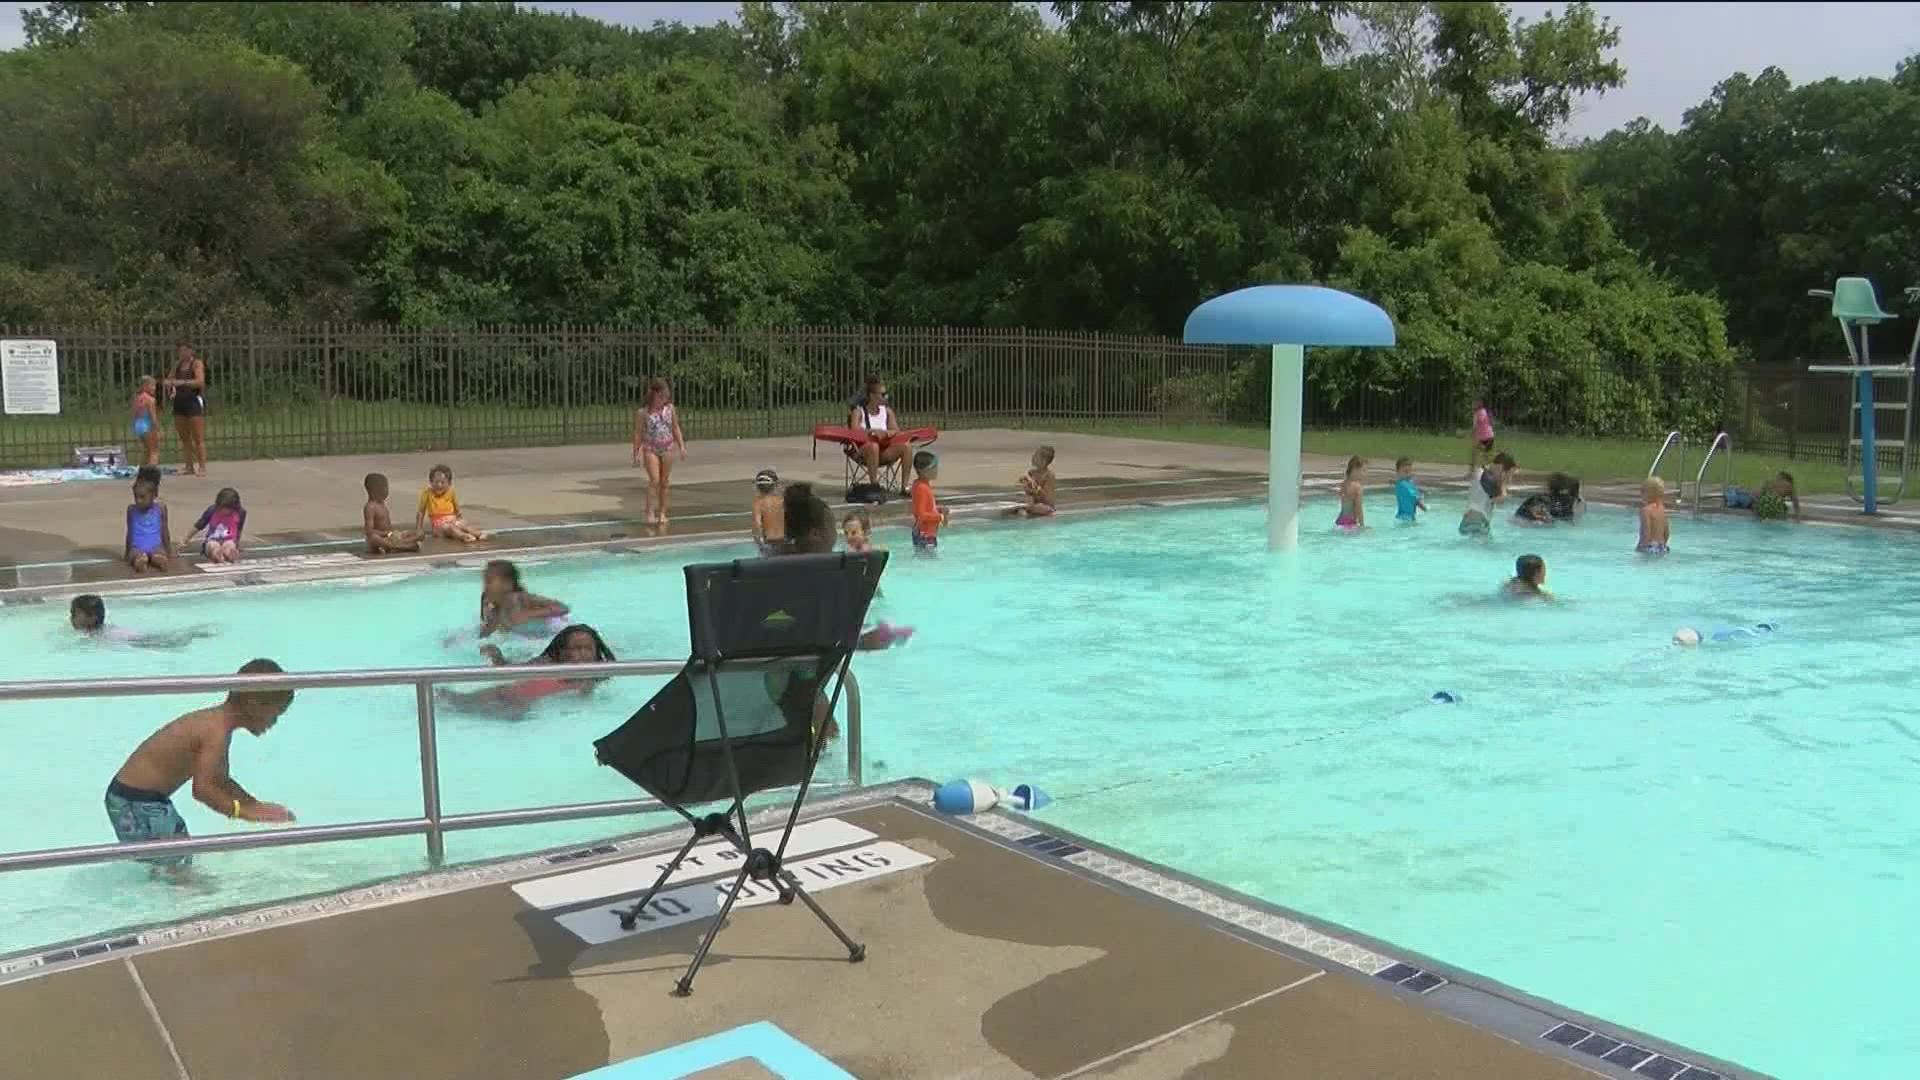 The city has recruited enough lifeguards to staff all the pools that have no maintenance issues.